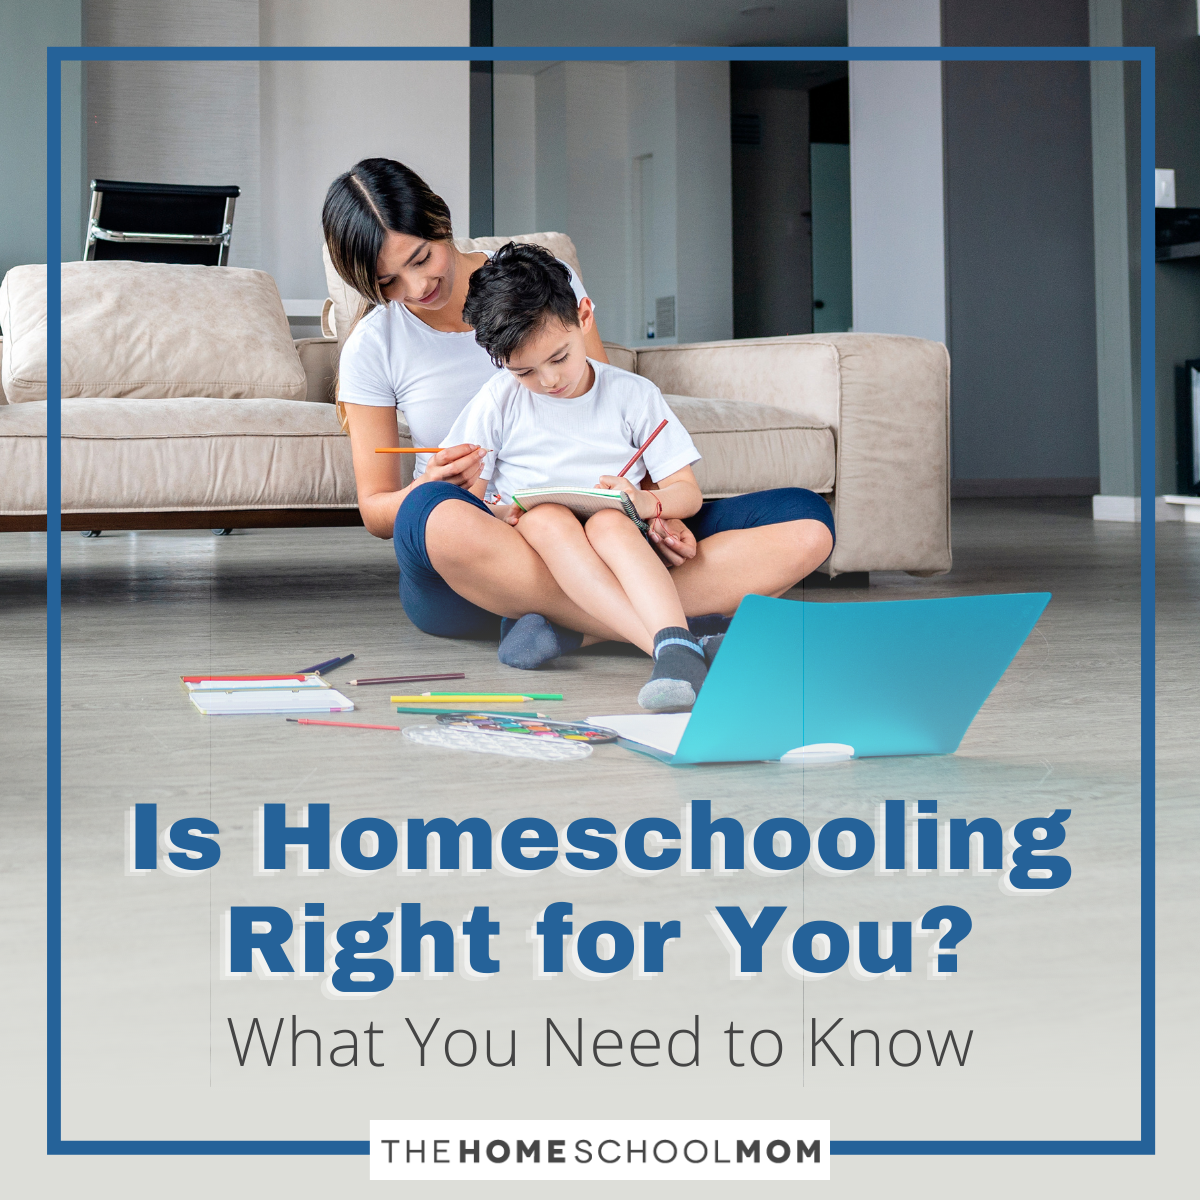 Is Homeschooling Right for You? What You Need to Know